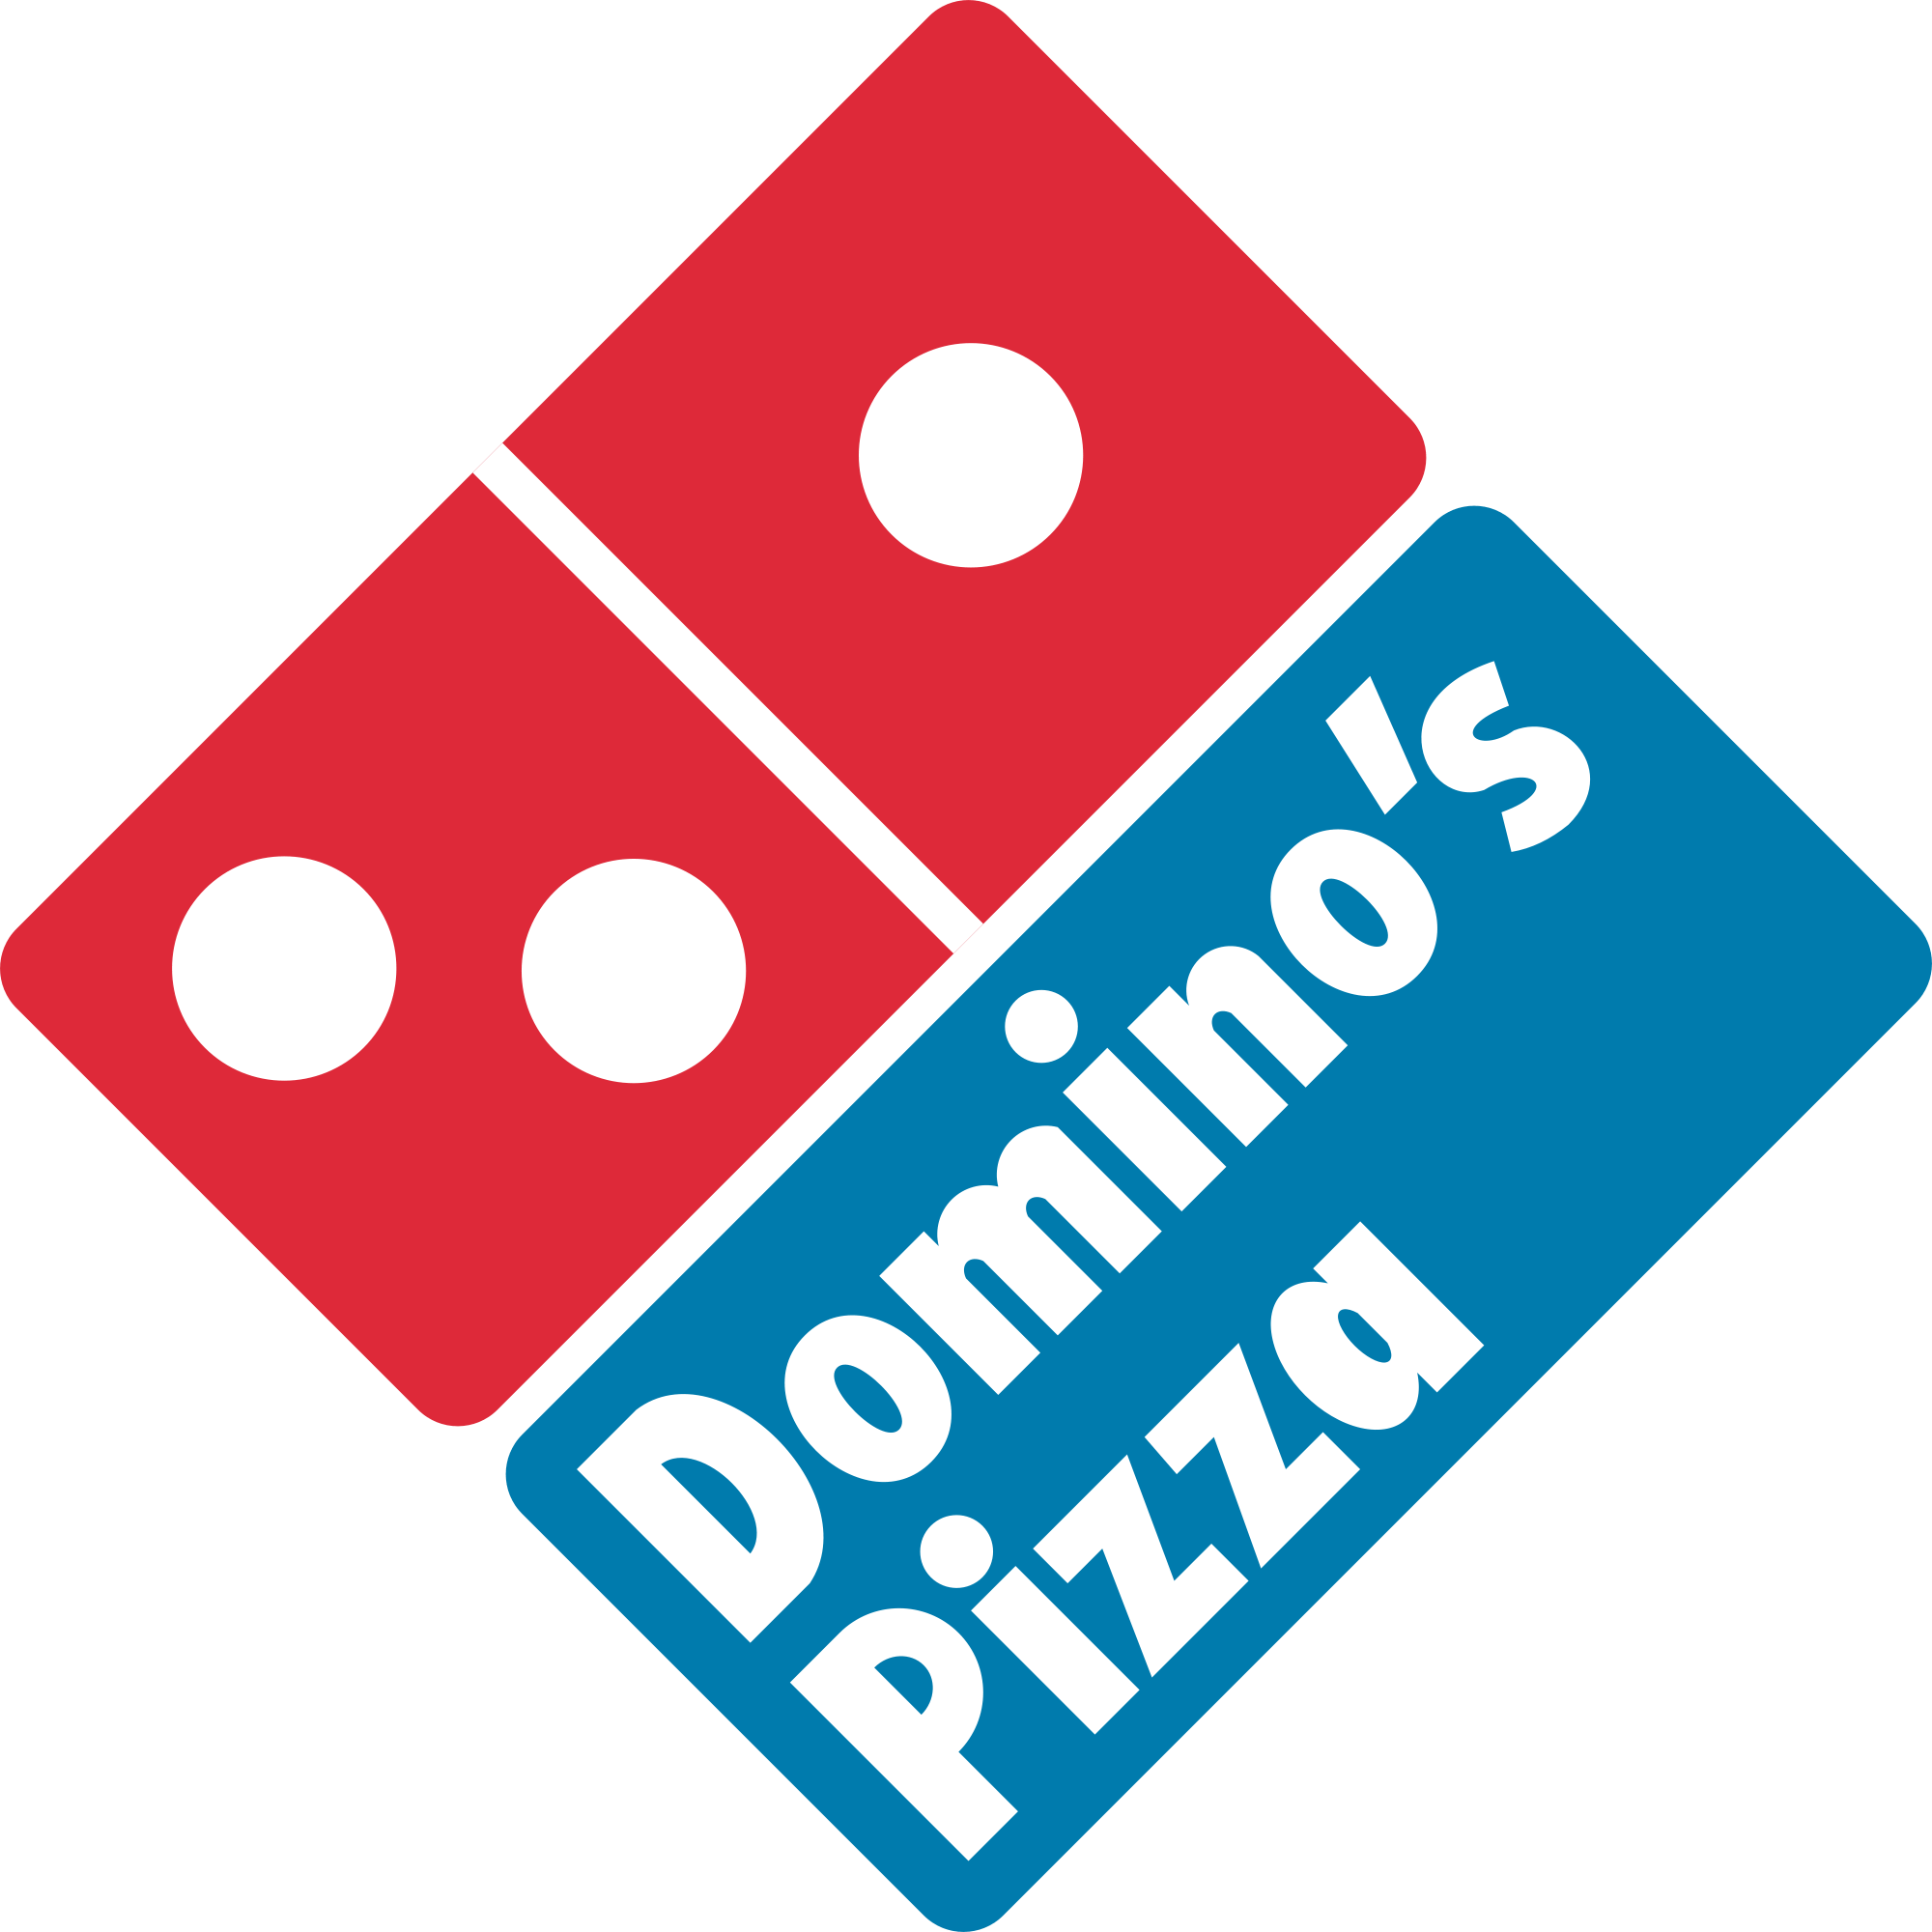 Two Red Rectangle Logo - File:Dominos pizza logo.svg - Wikimedia Commons